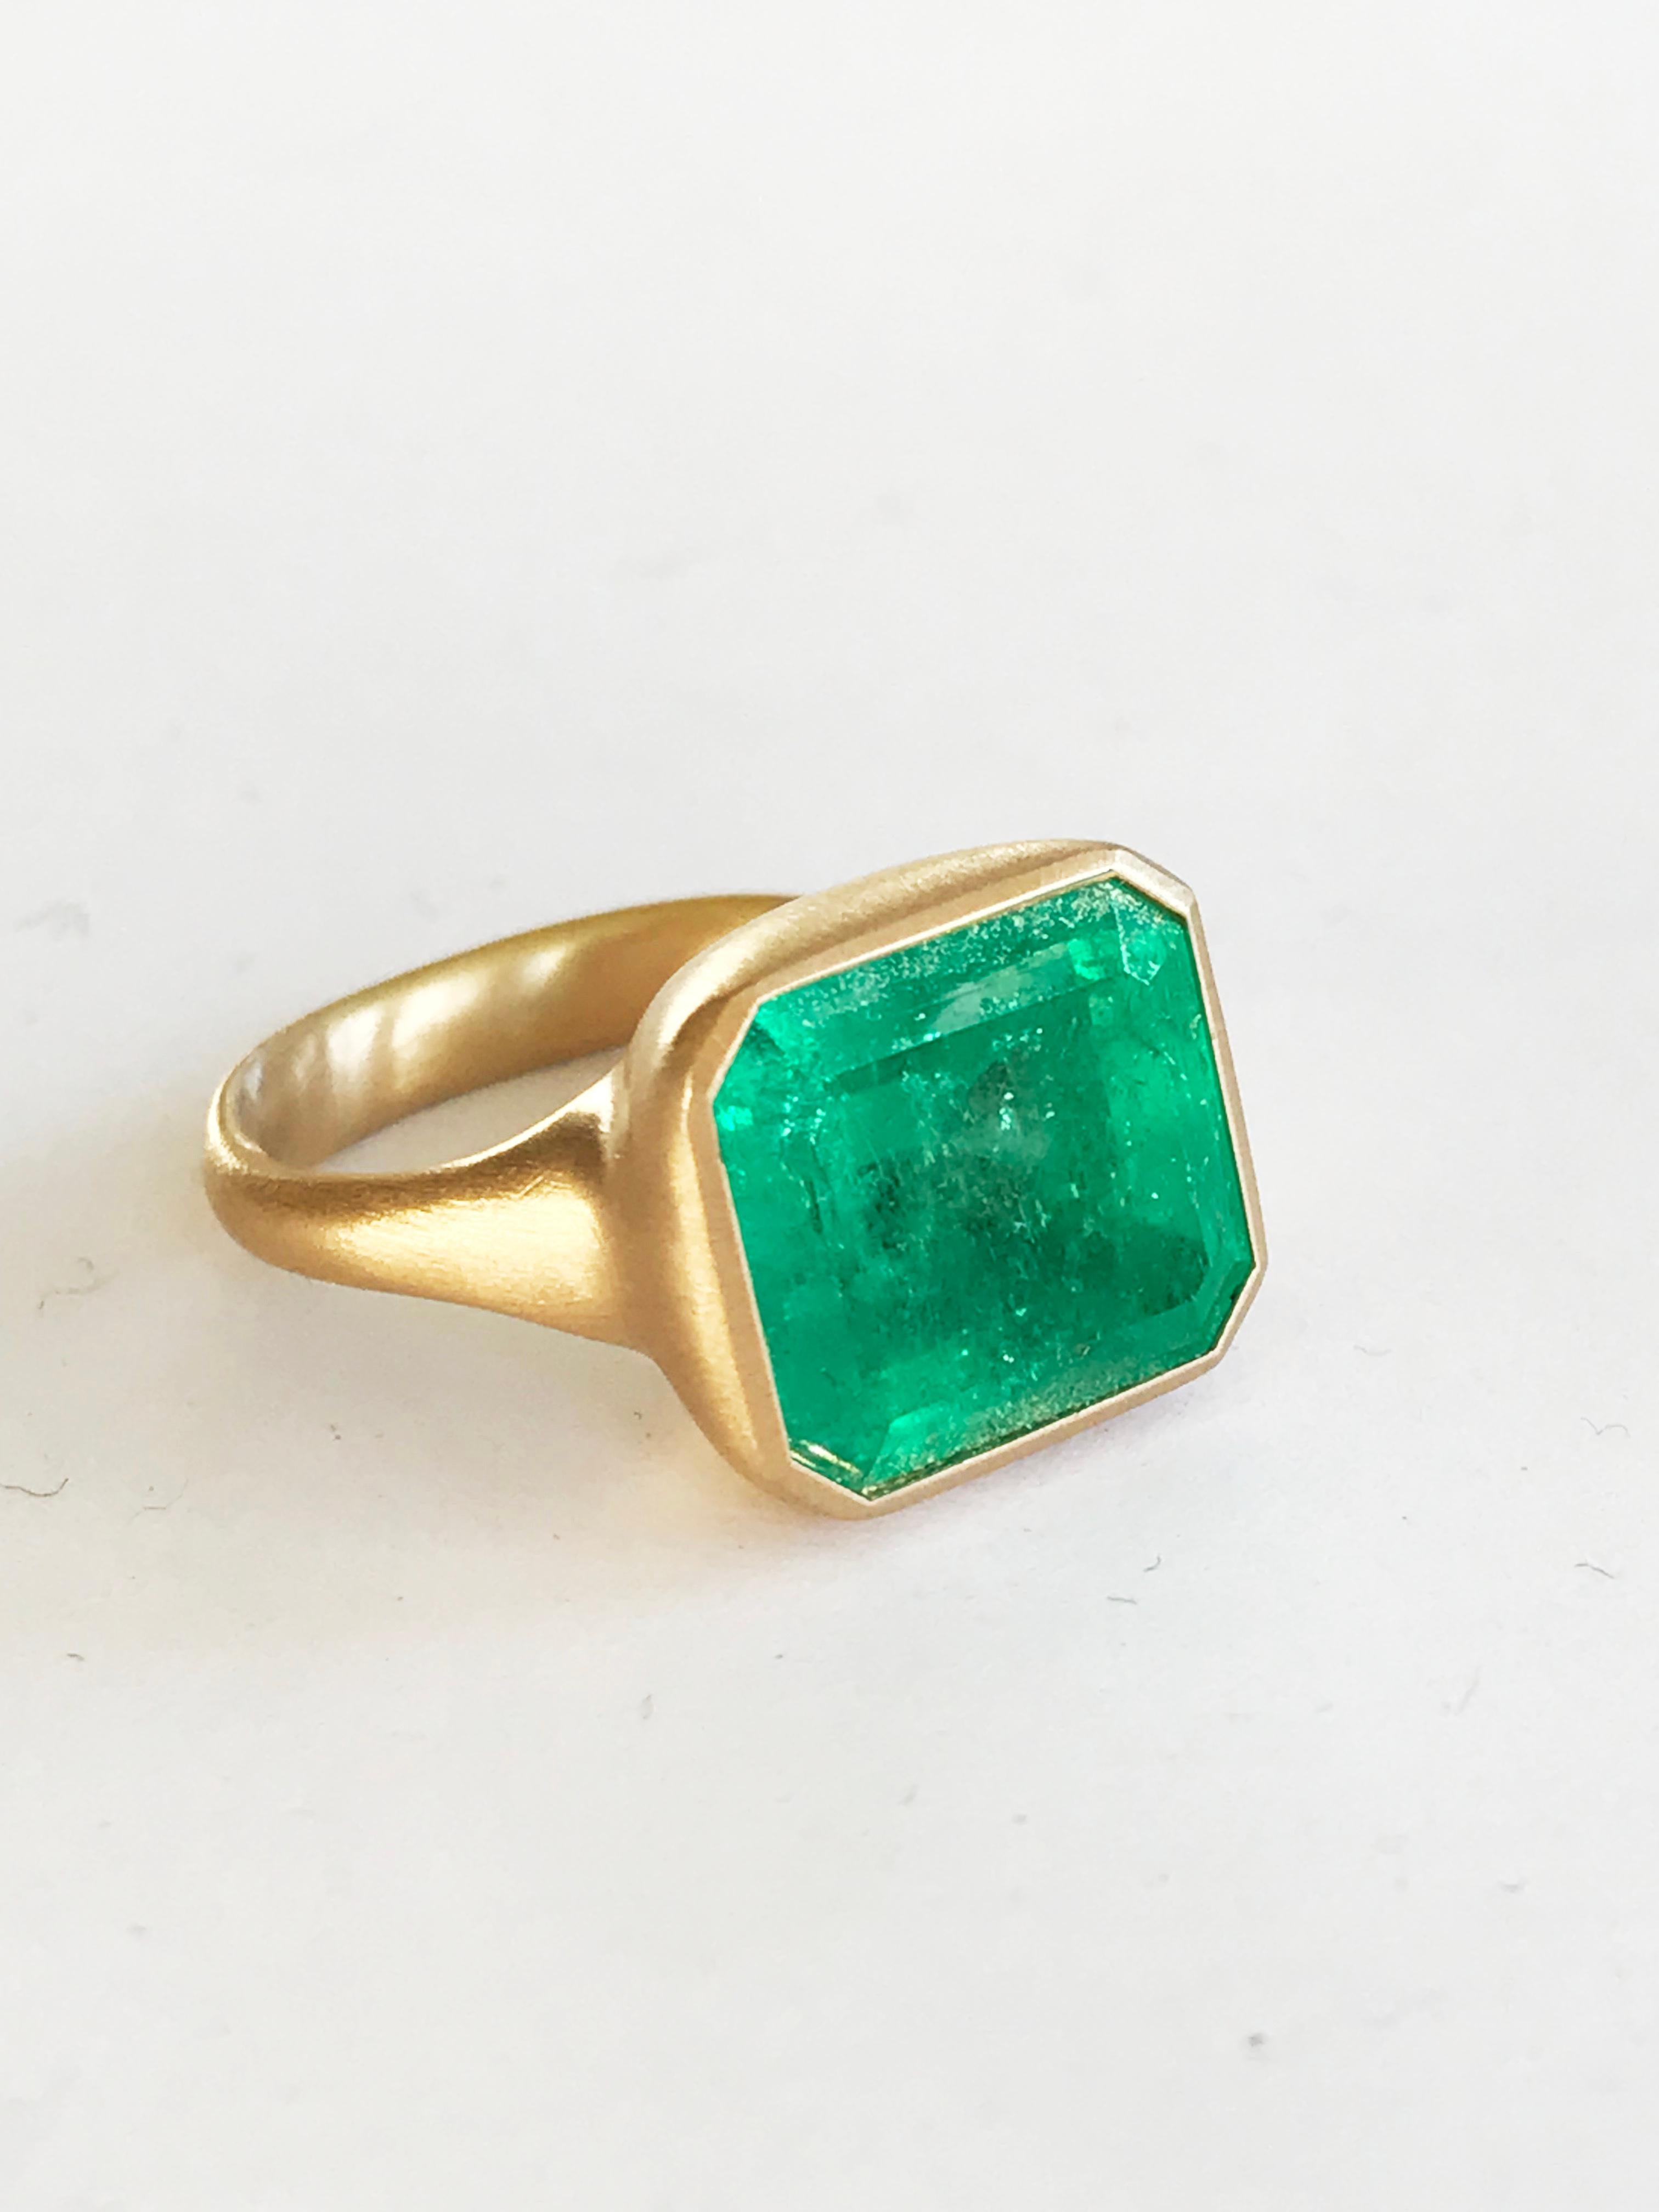 Dalben Magnificent 8.3 Carat Certified Colombian Emerald Yellow Gold Ring For Sale 2